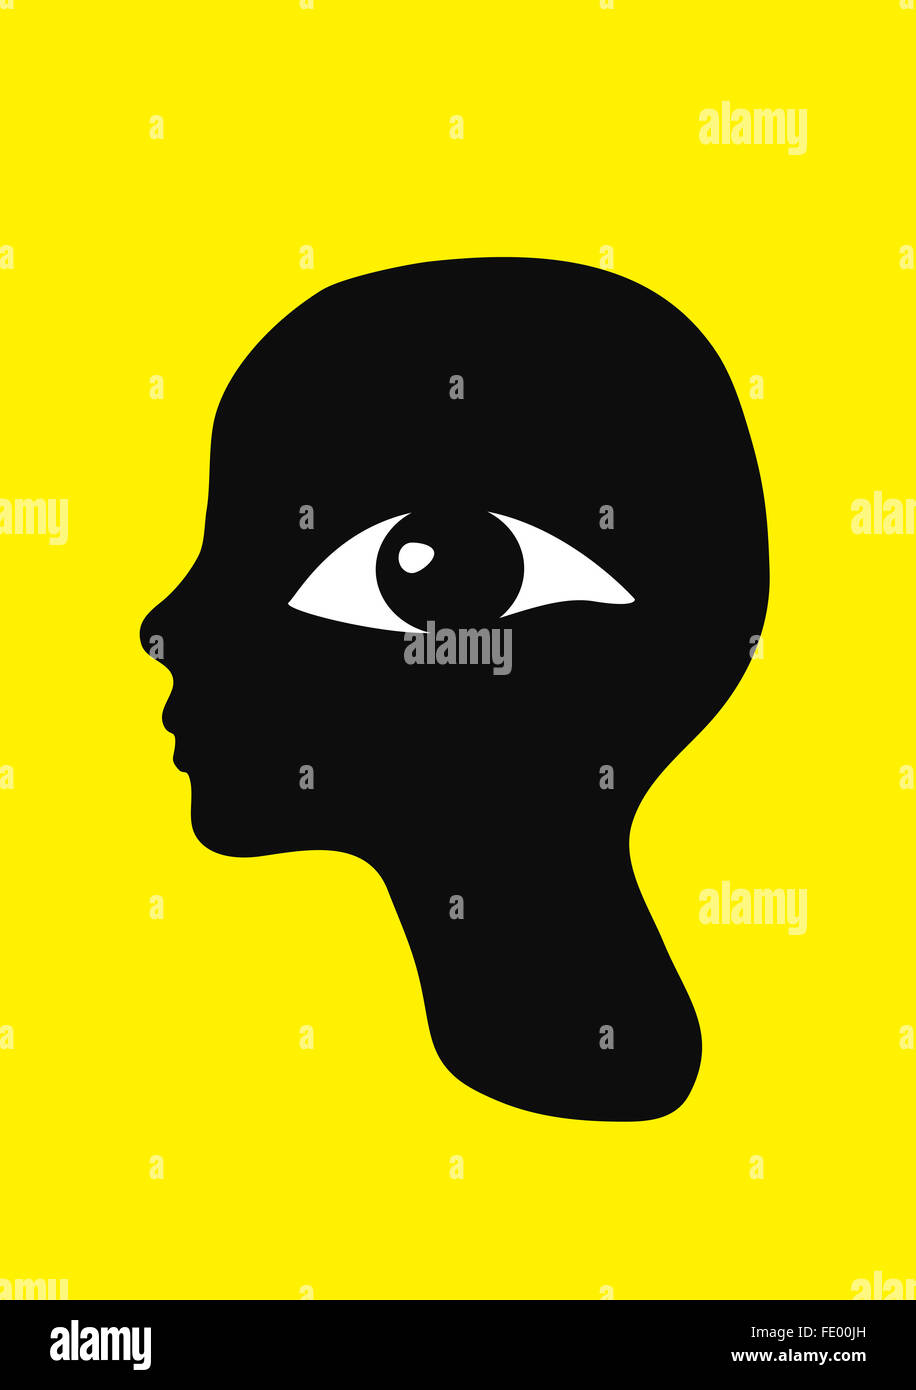 A retro graphic profile portrait with a large eye watching the viewer. Stock Photo